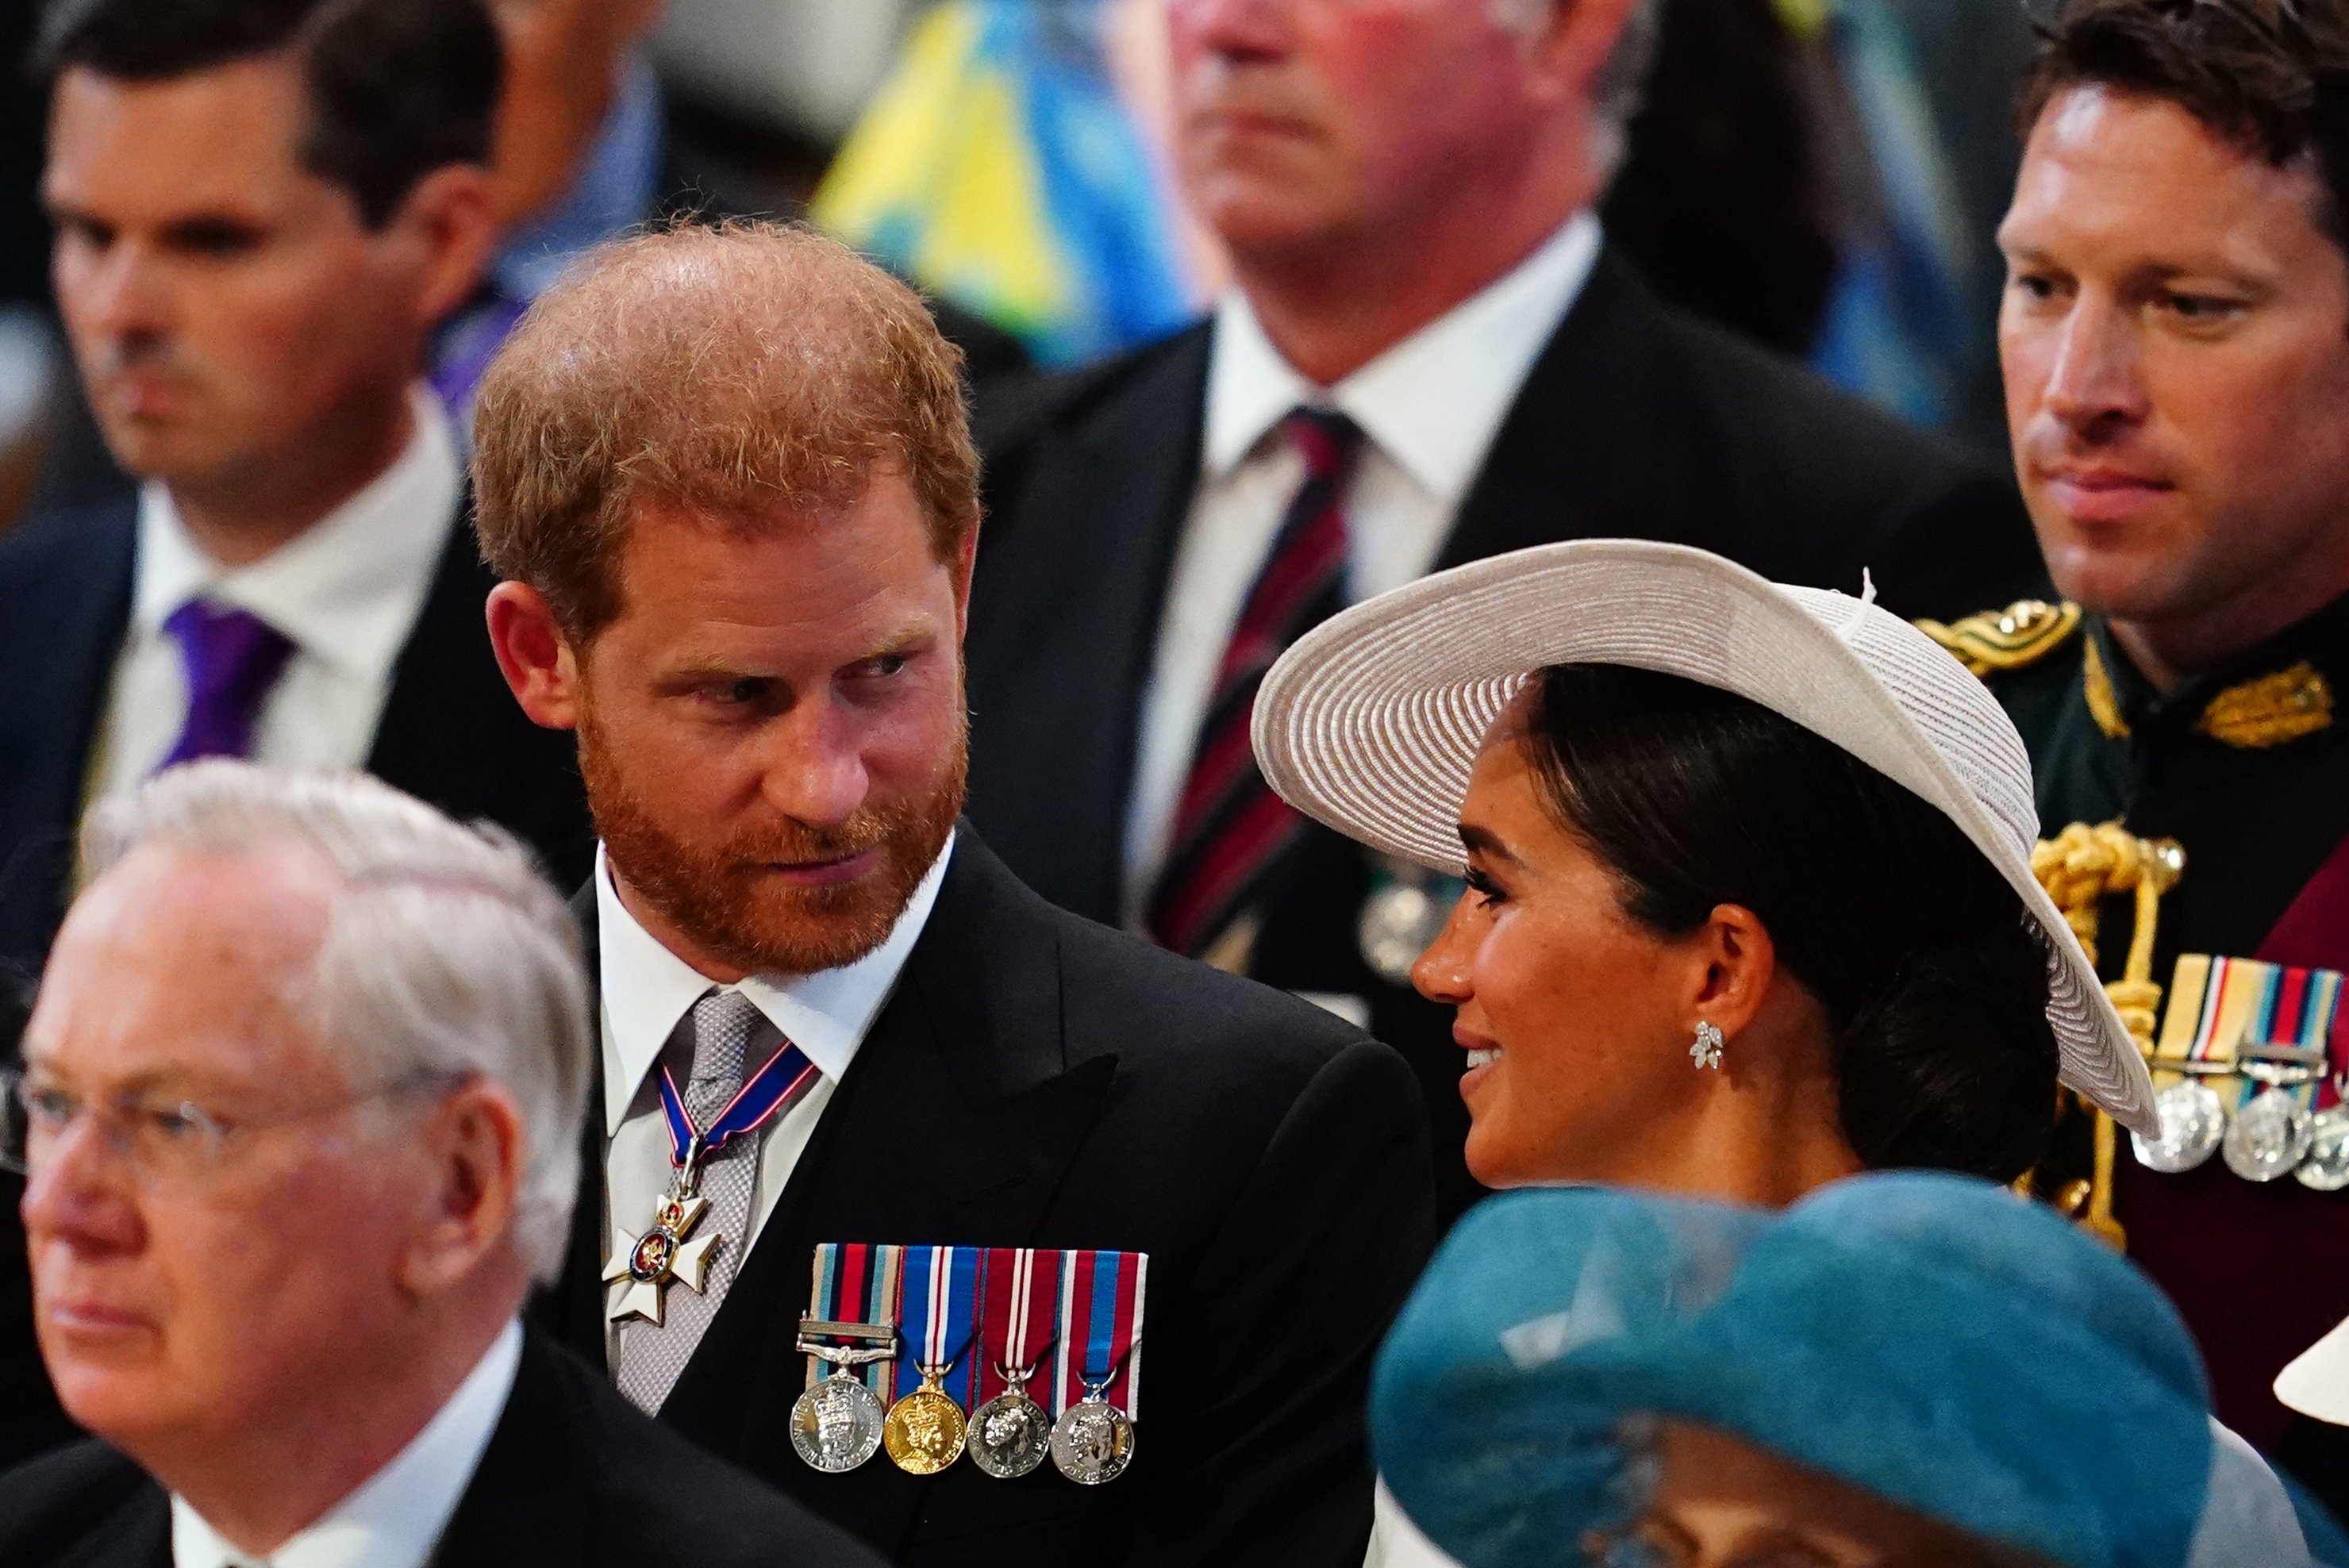 Prince Harry and Duchess Meghan at the National Service of Thanksgiving to celebrate the Platinum Jubilee of the Queen at St Paul's Cathedral on June 3, 2022, in London, England. | Source: Getty Images